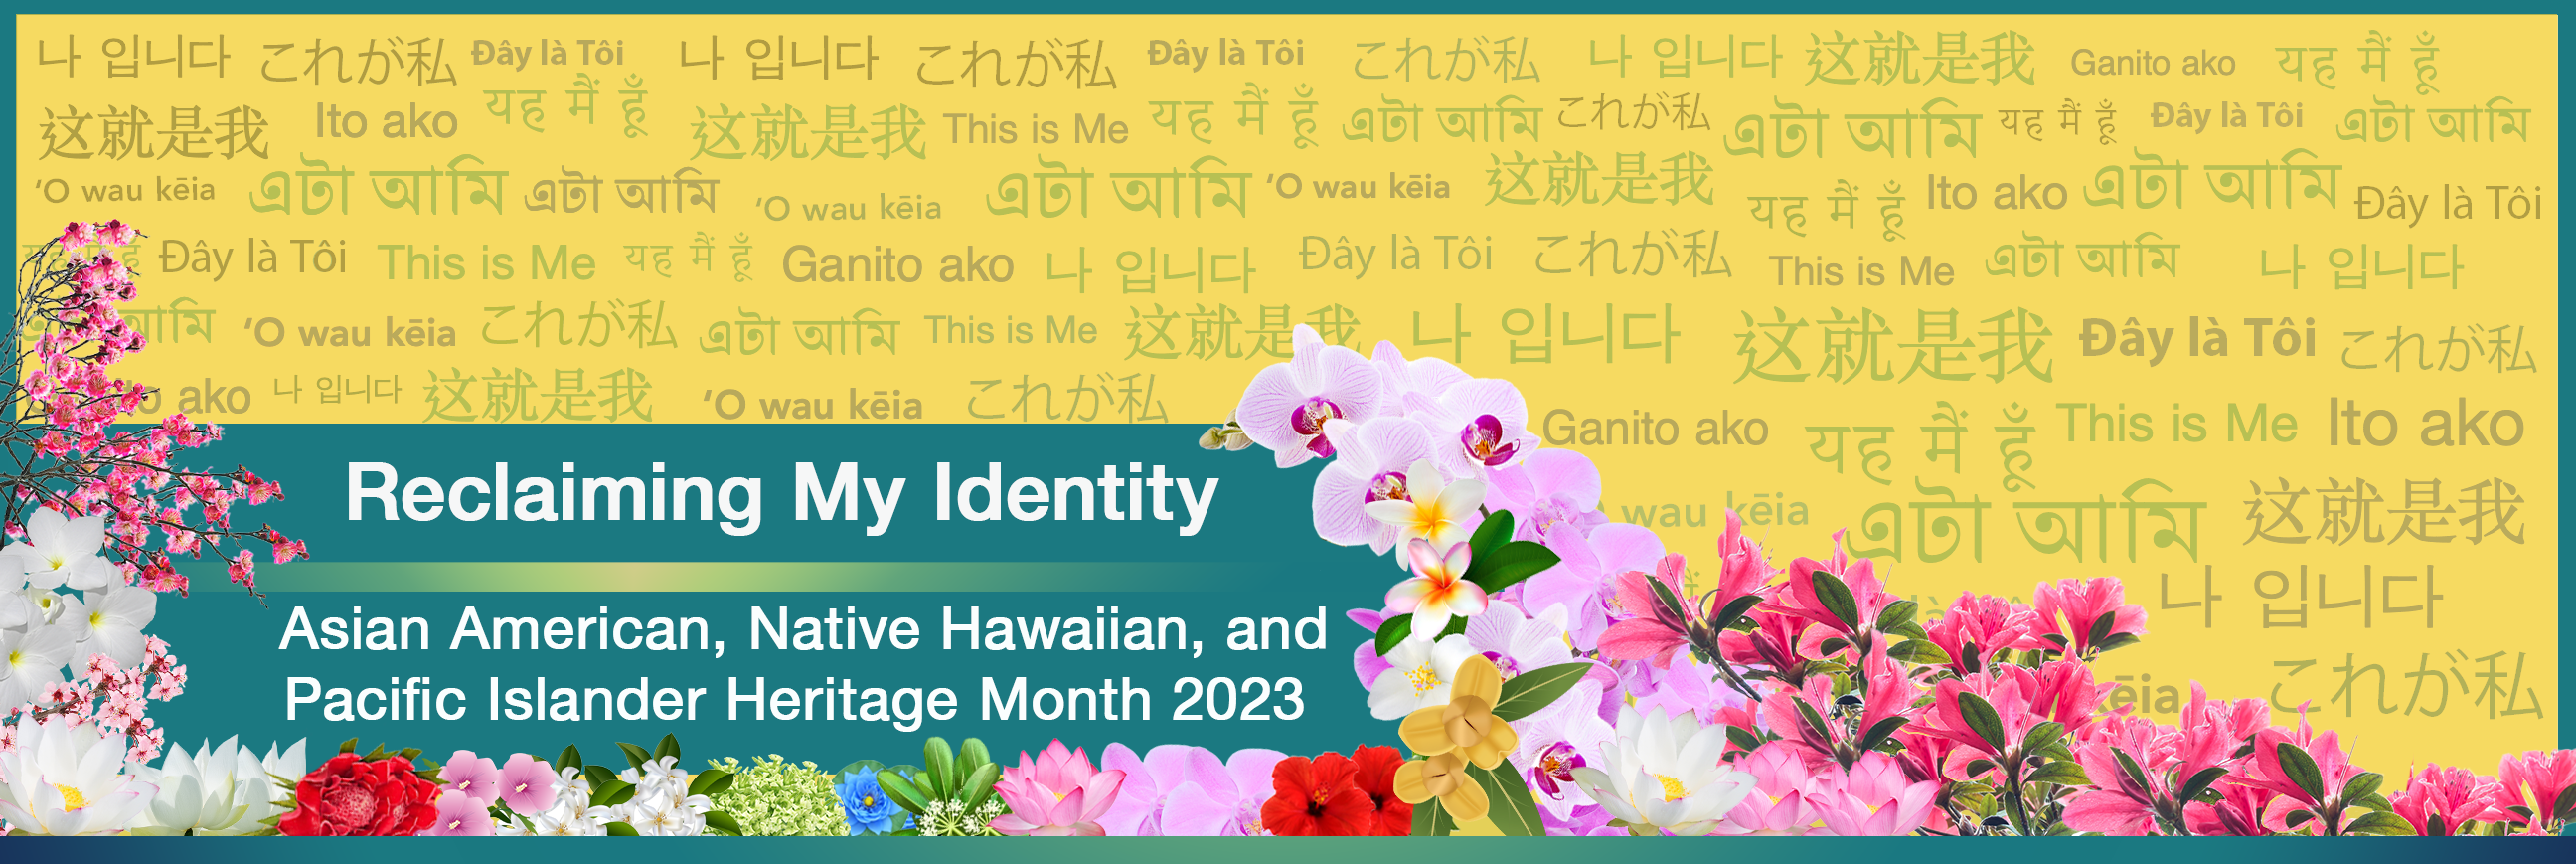 A graphic of the 2023 Asian American, Native Hawaiian, and Pacific Islander (AA and NHPI) Heritage Month campaign banner that shows the phrase This is Me, translated in Korean, Hindi, Bengali, Tagalog, Japanese, Chinese, Vietnamese, and Native Hawaiian with the national flowers of over 20 Asian and Pacific Island countries.